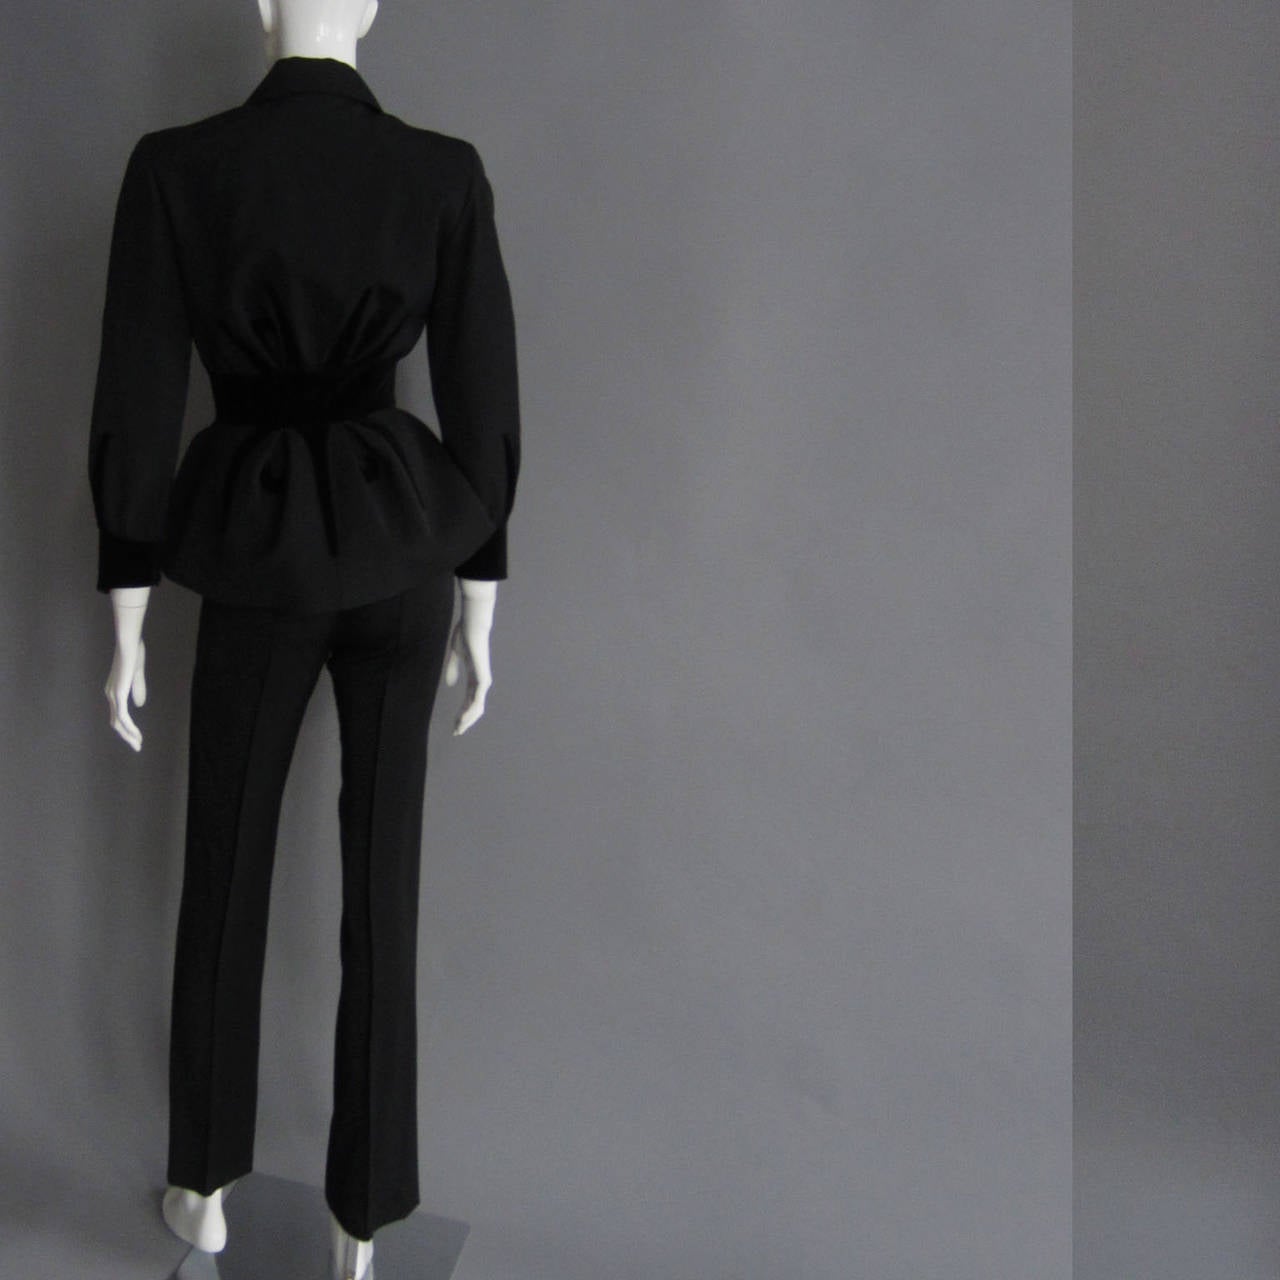 THIERRY MUGLER Black Pant Suit with Velvet Detailing 1